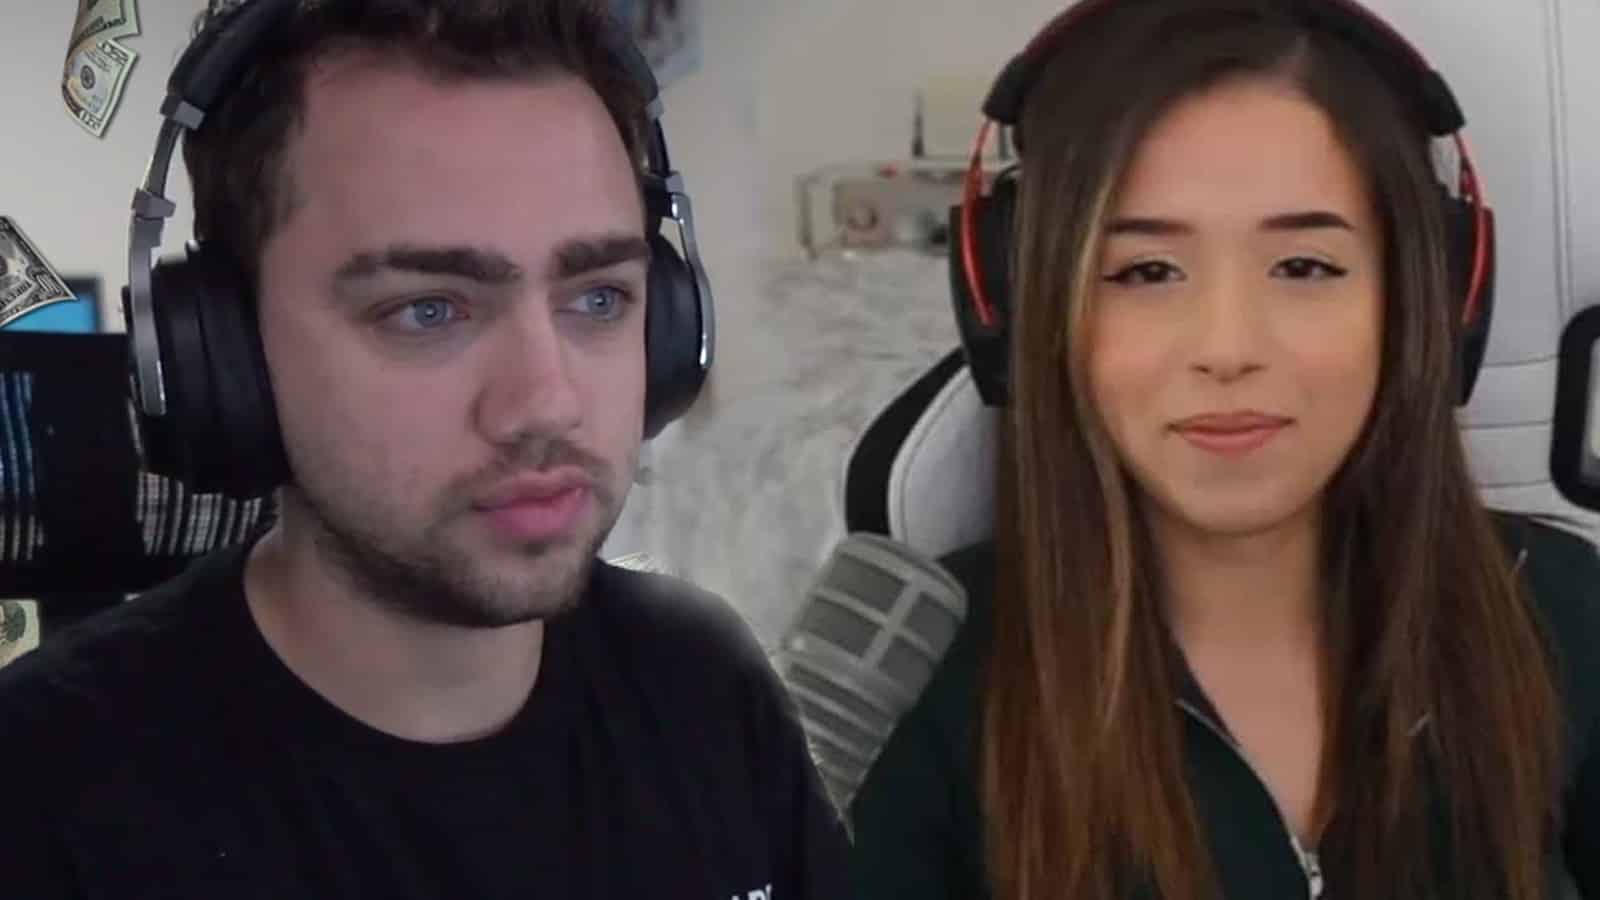 Pokimane laughs off Mizkif's song about her drama with 39daph - Dexerto